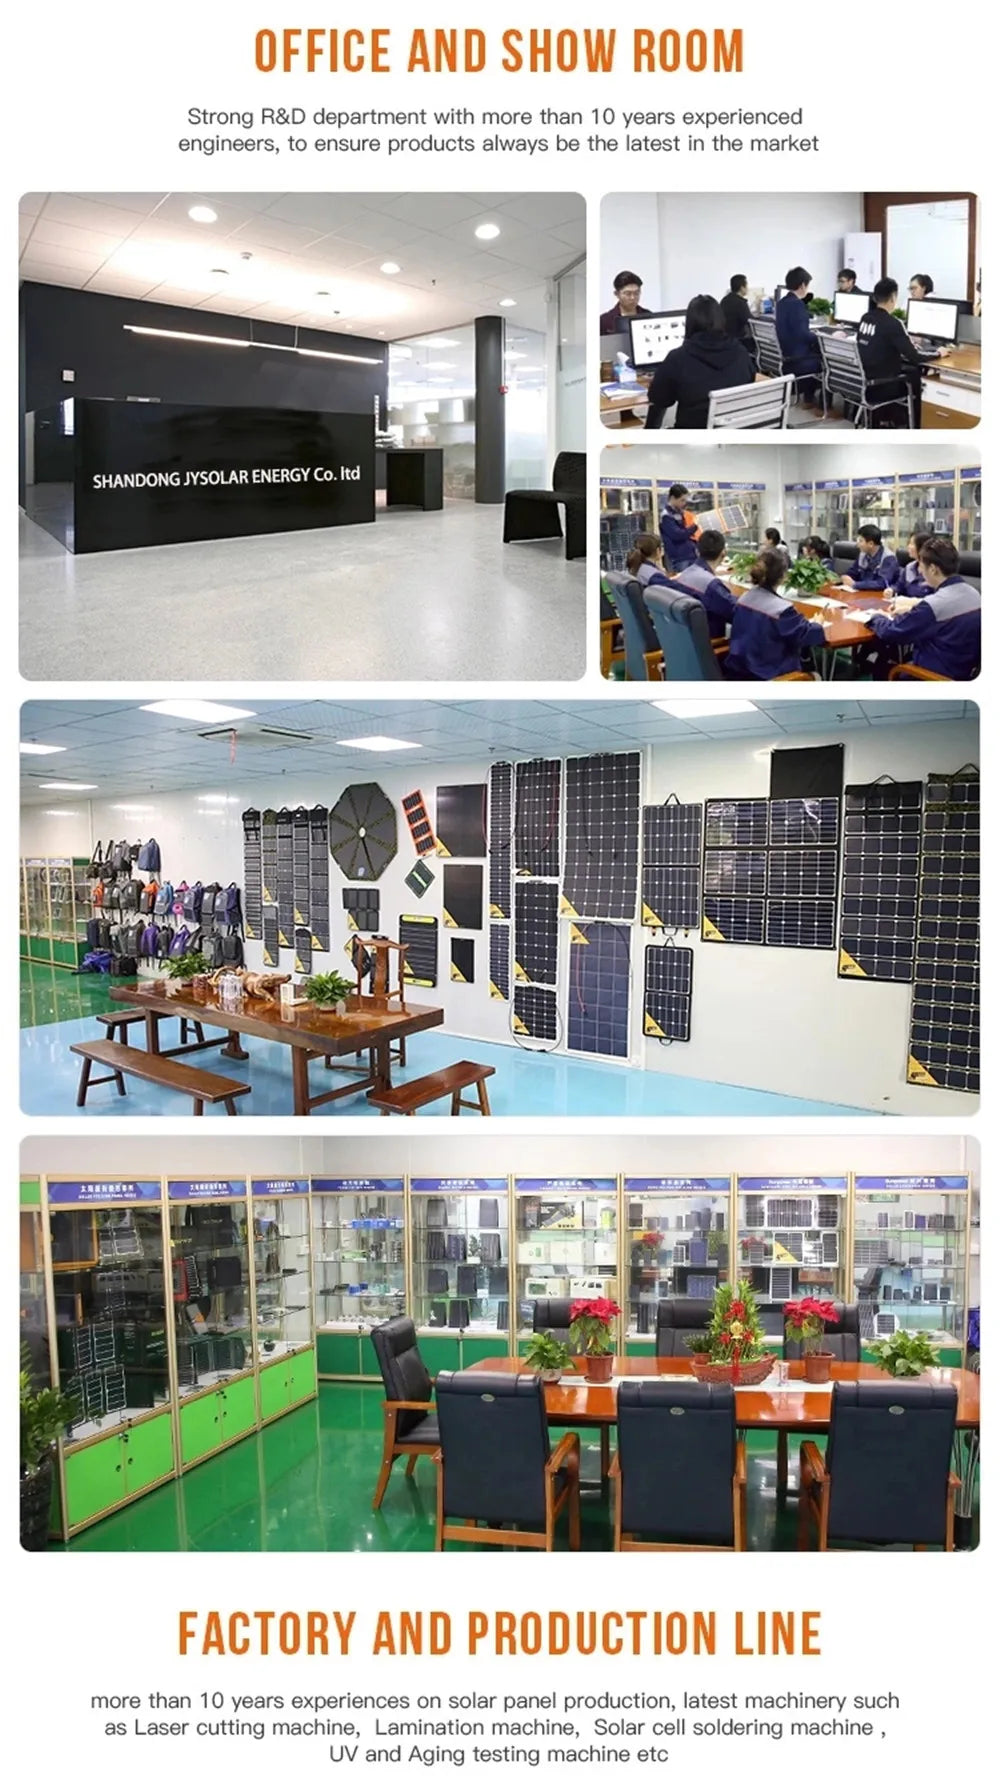 Shandong Jysolar Energy Co., Ltd.: Leader in solar panel production with R&D expertise and advanced manufacturing equipment.